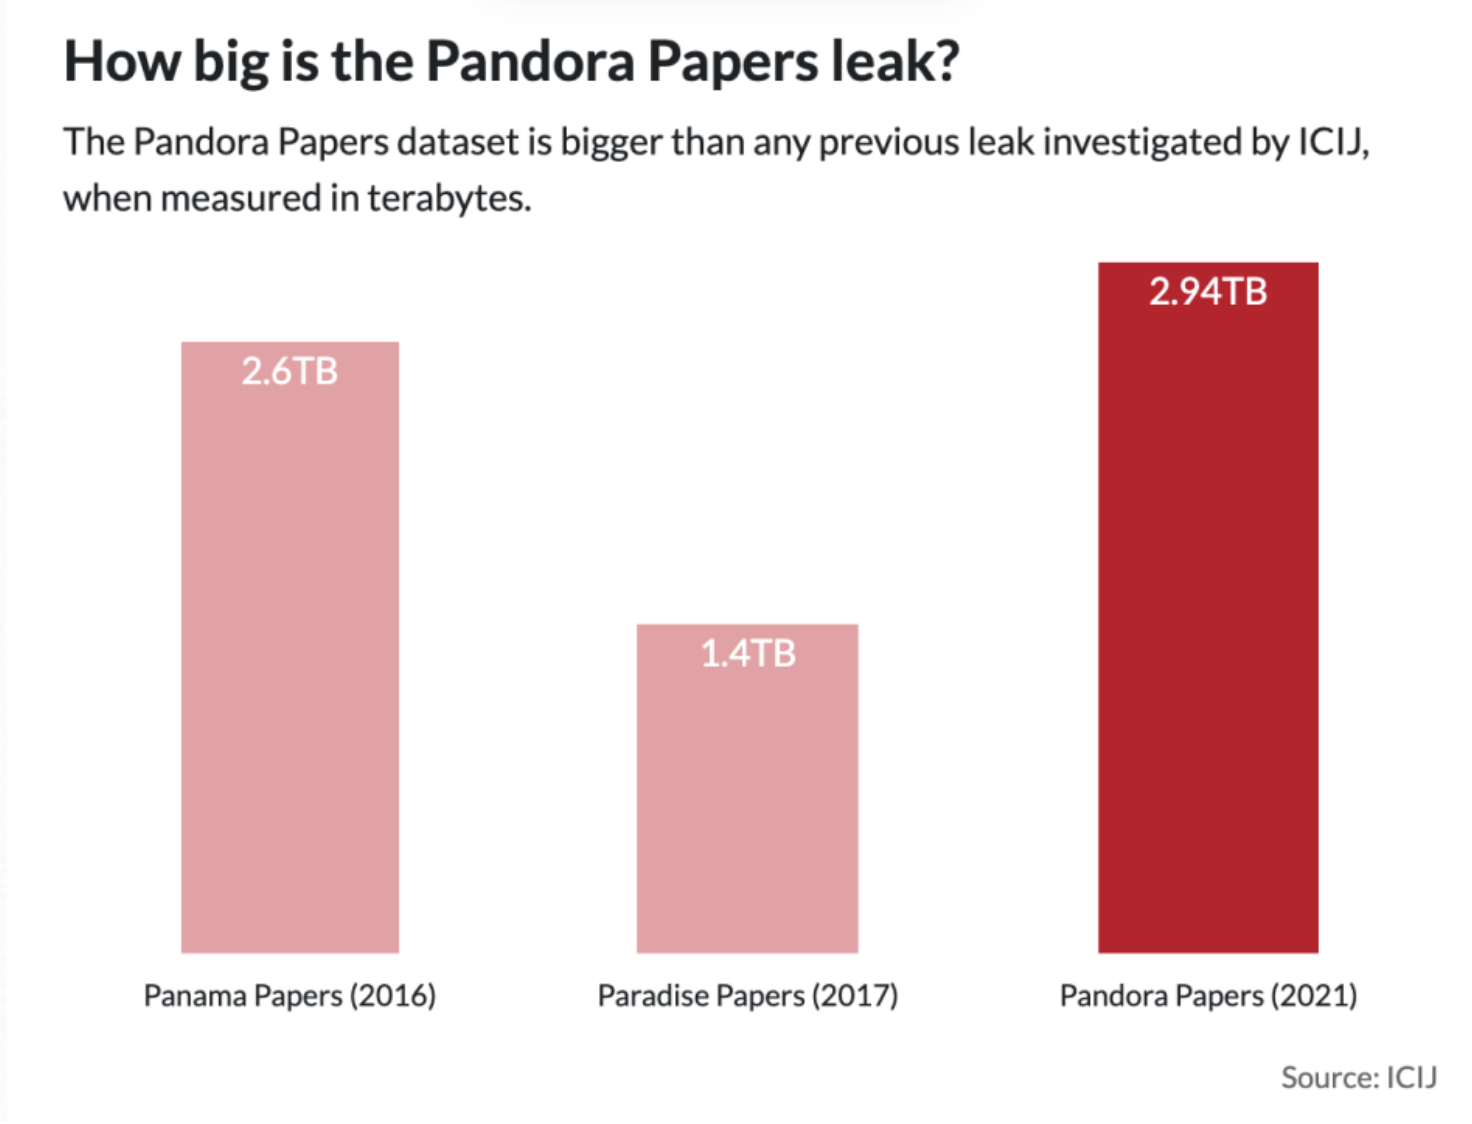 Chart showing Pandora Papers is bigger than any previous leak investigated by ICIJ